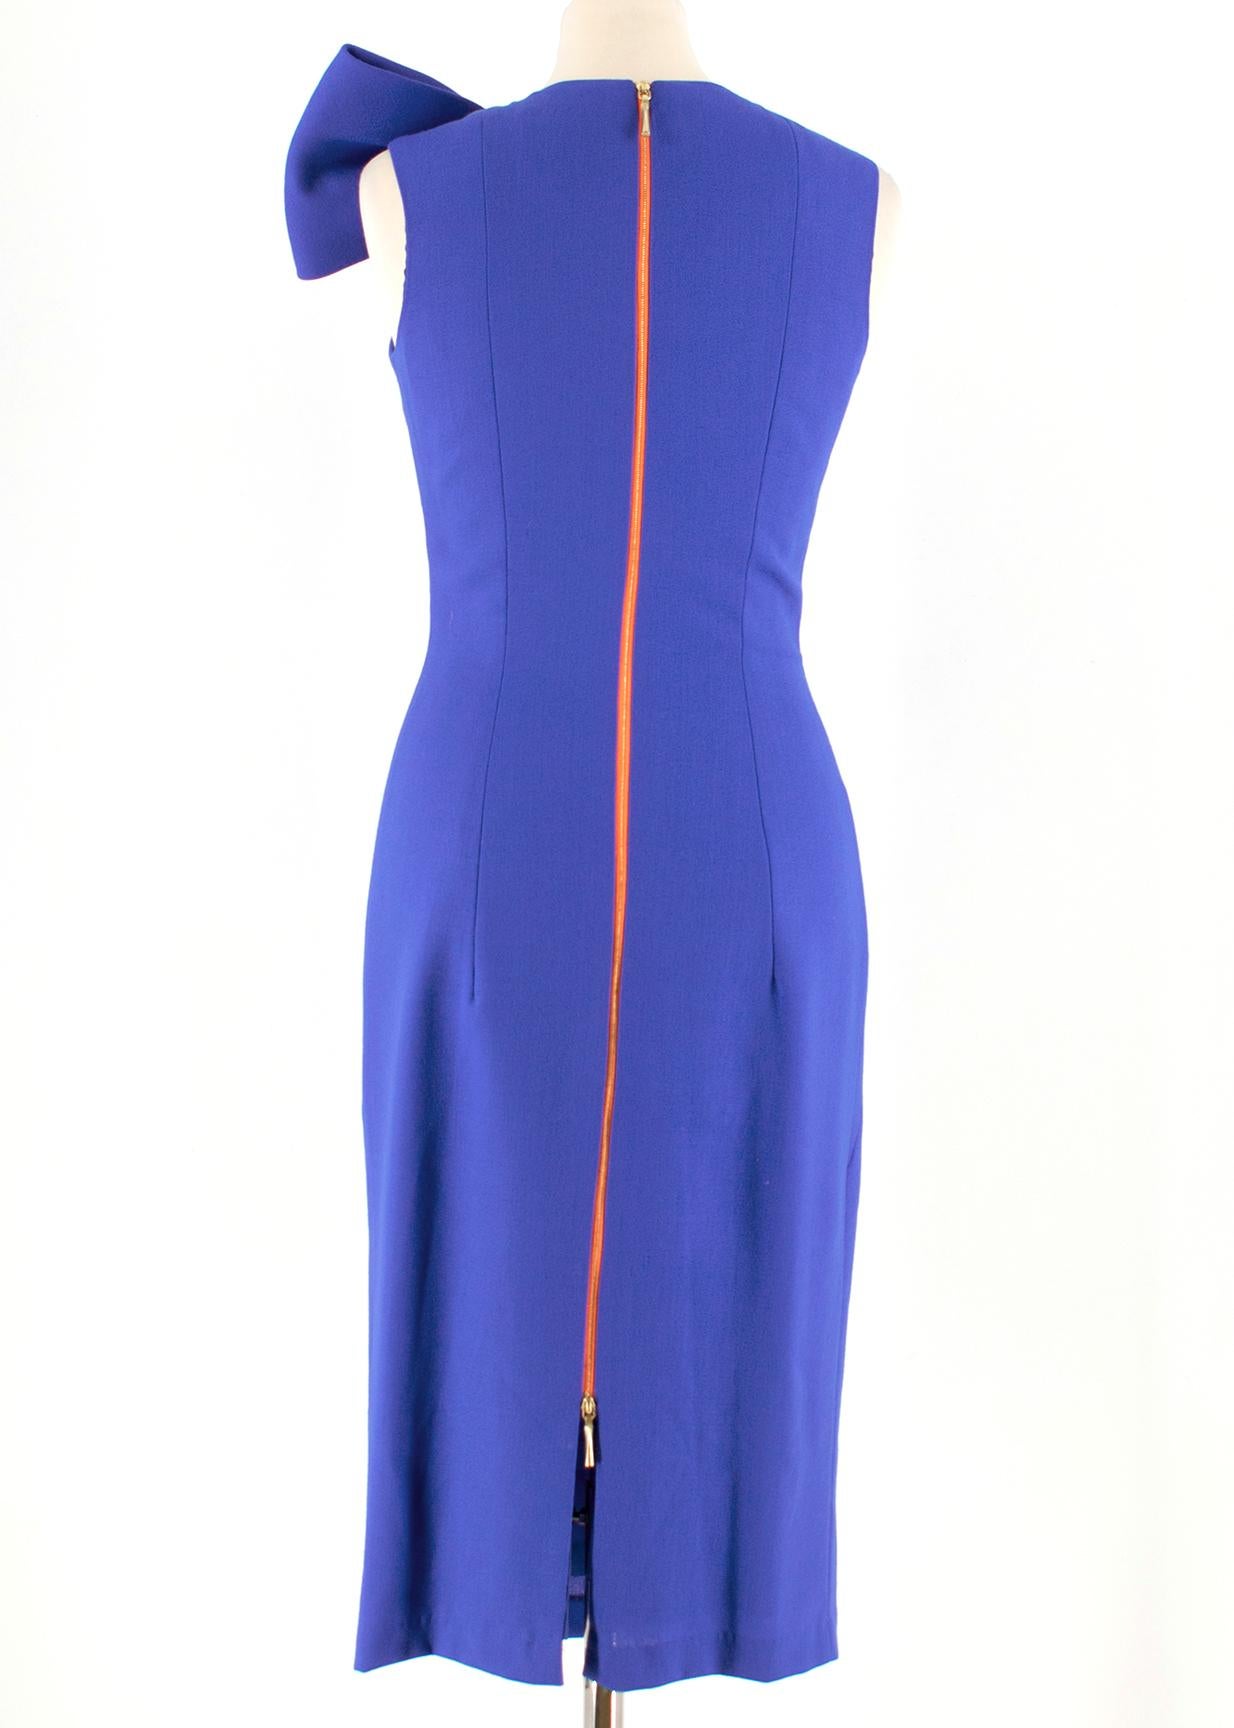 philip armstrong dress